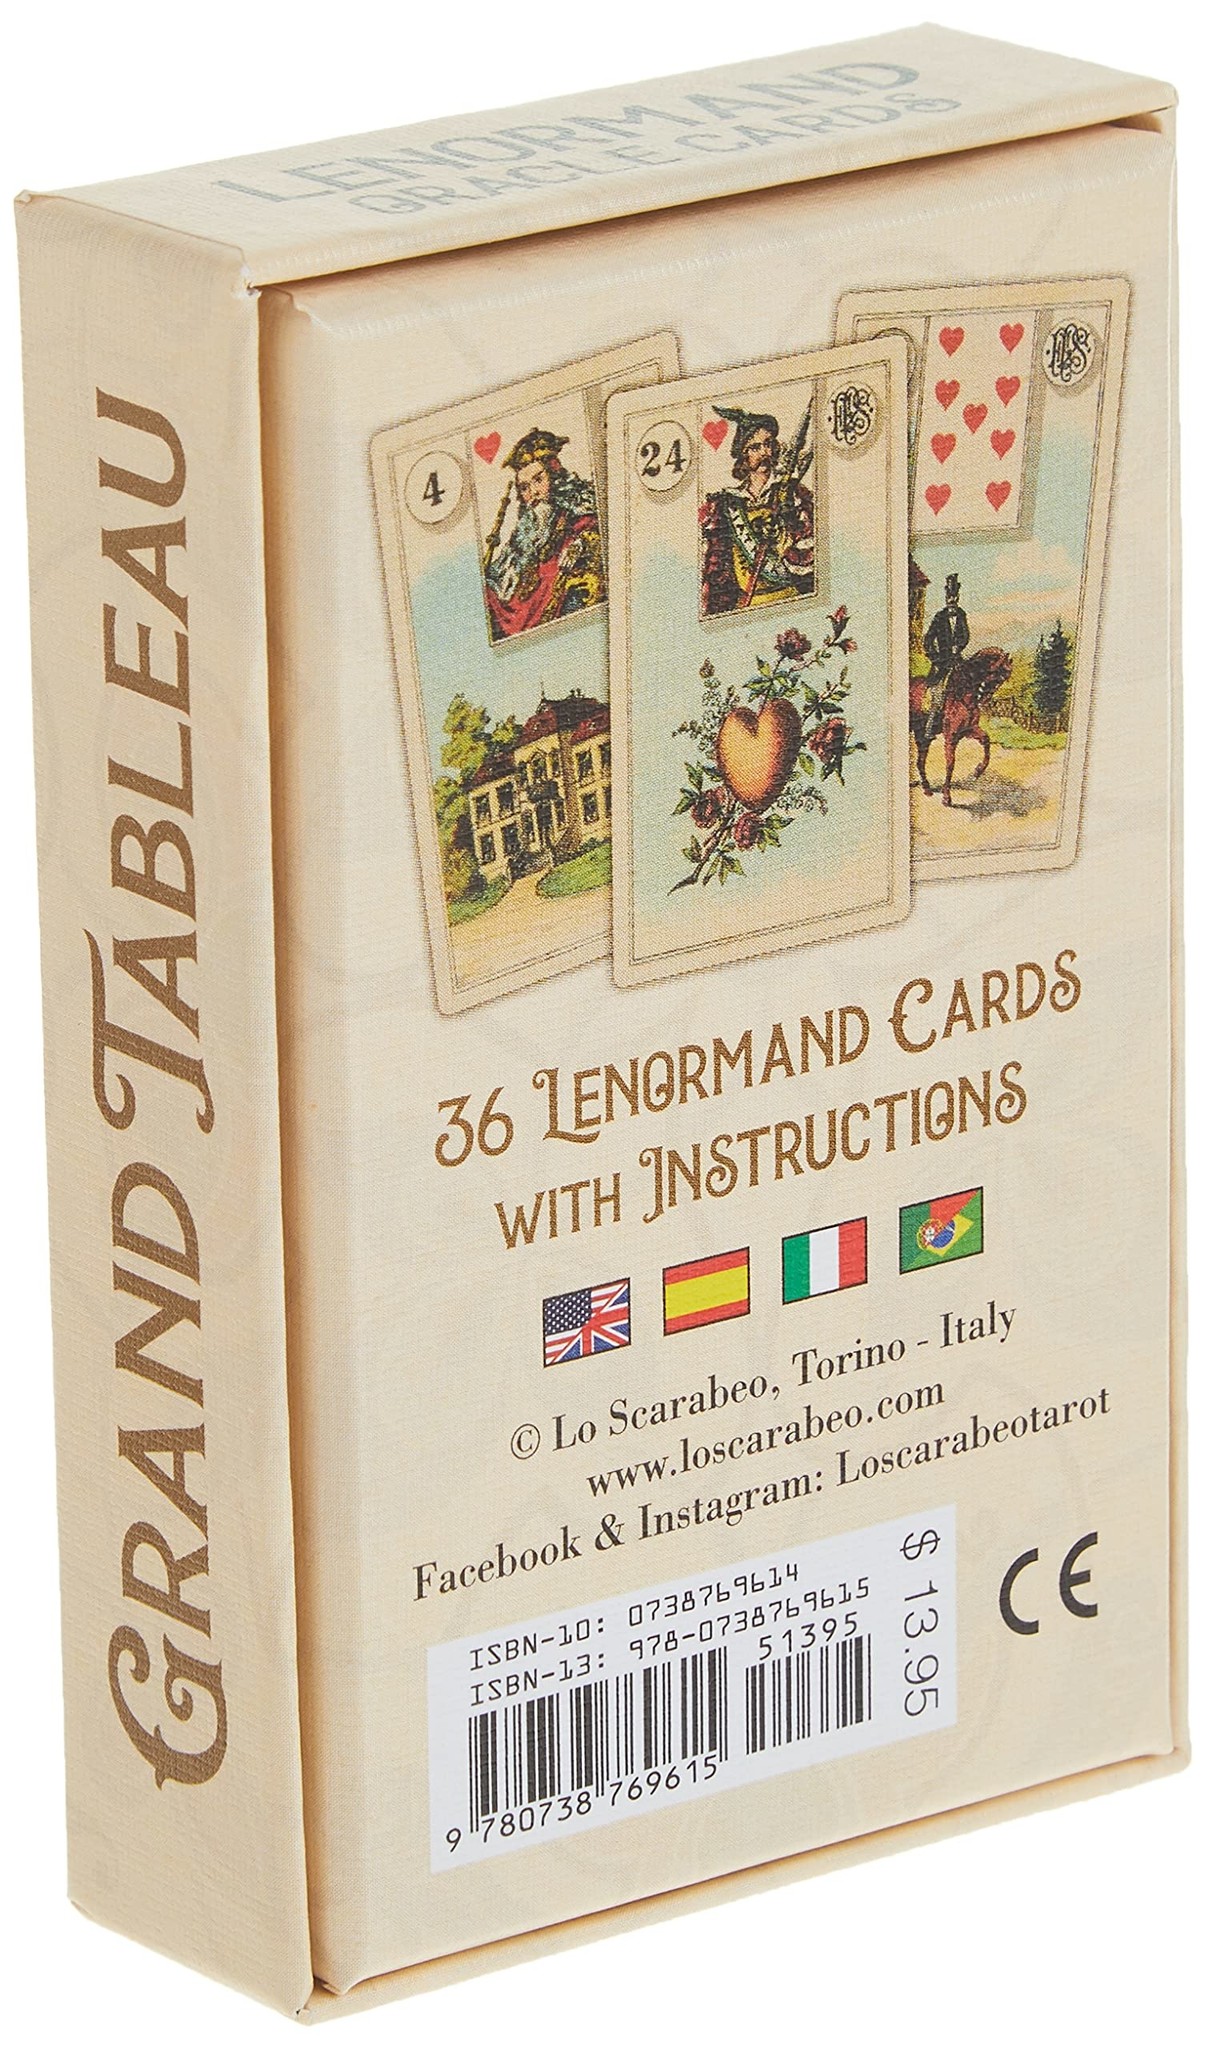 Grand Tableau Lenormand Oracle Cards – Lo Scarabeo S.r.l.